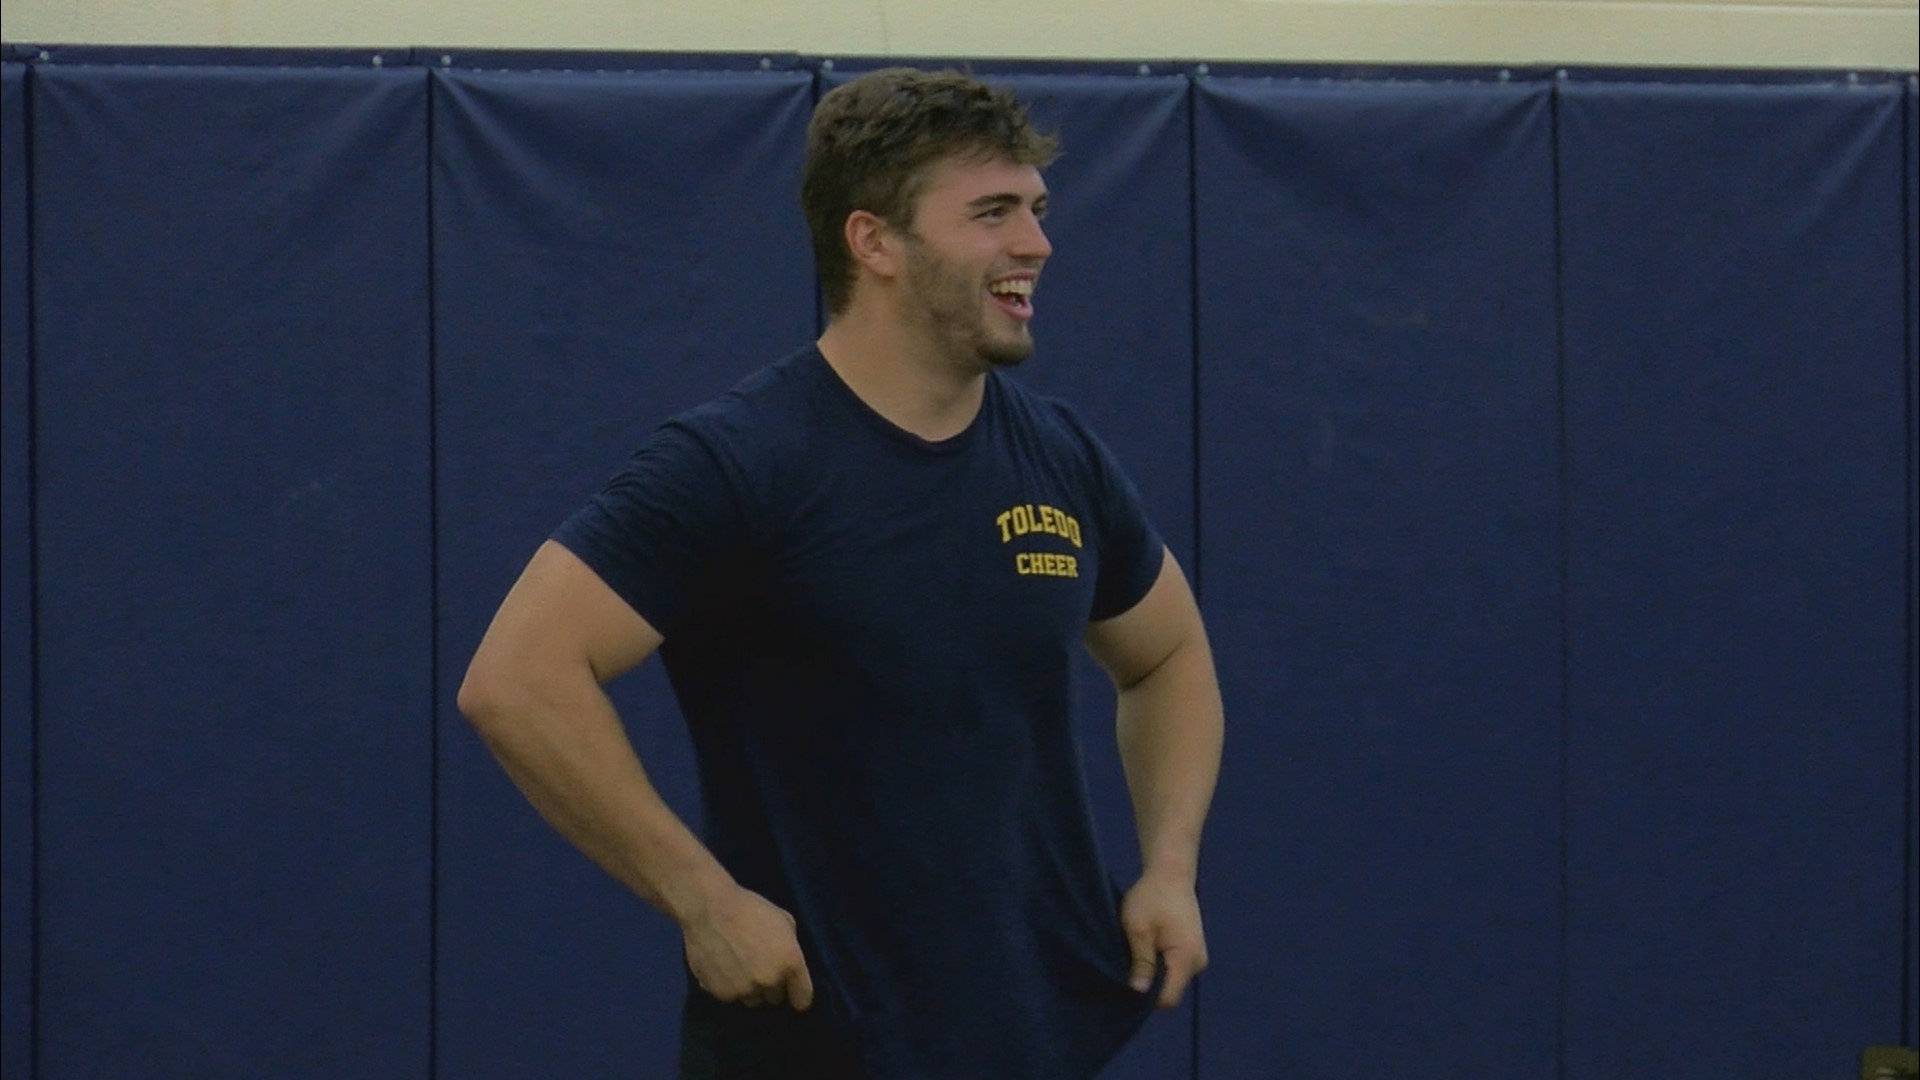 DeSantis was a standout linebacker at Central Catholic before making his way to the sideline as a cheerleader for the University of Toledo.